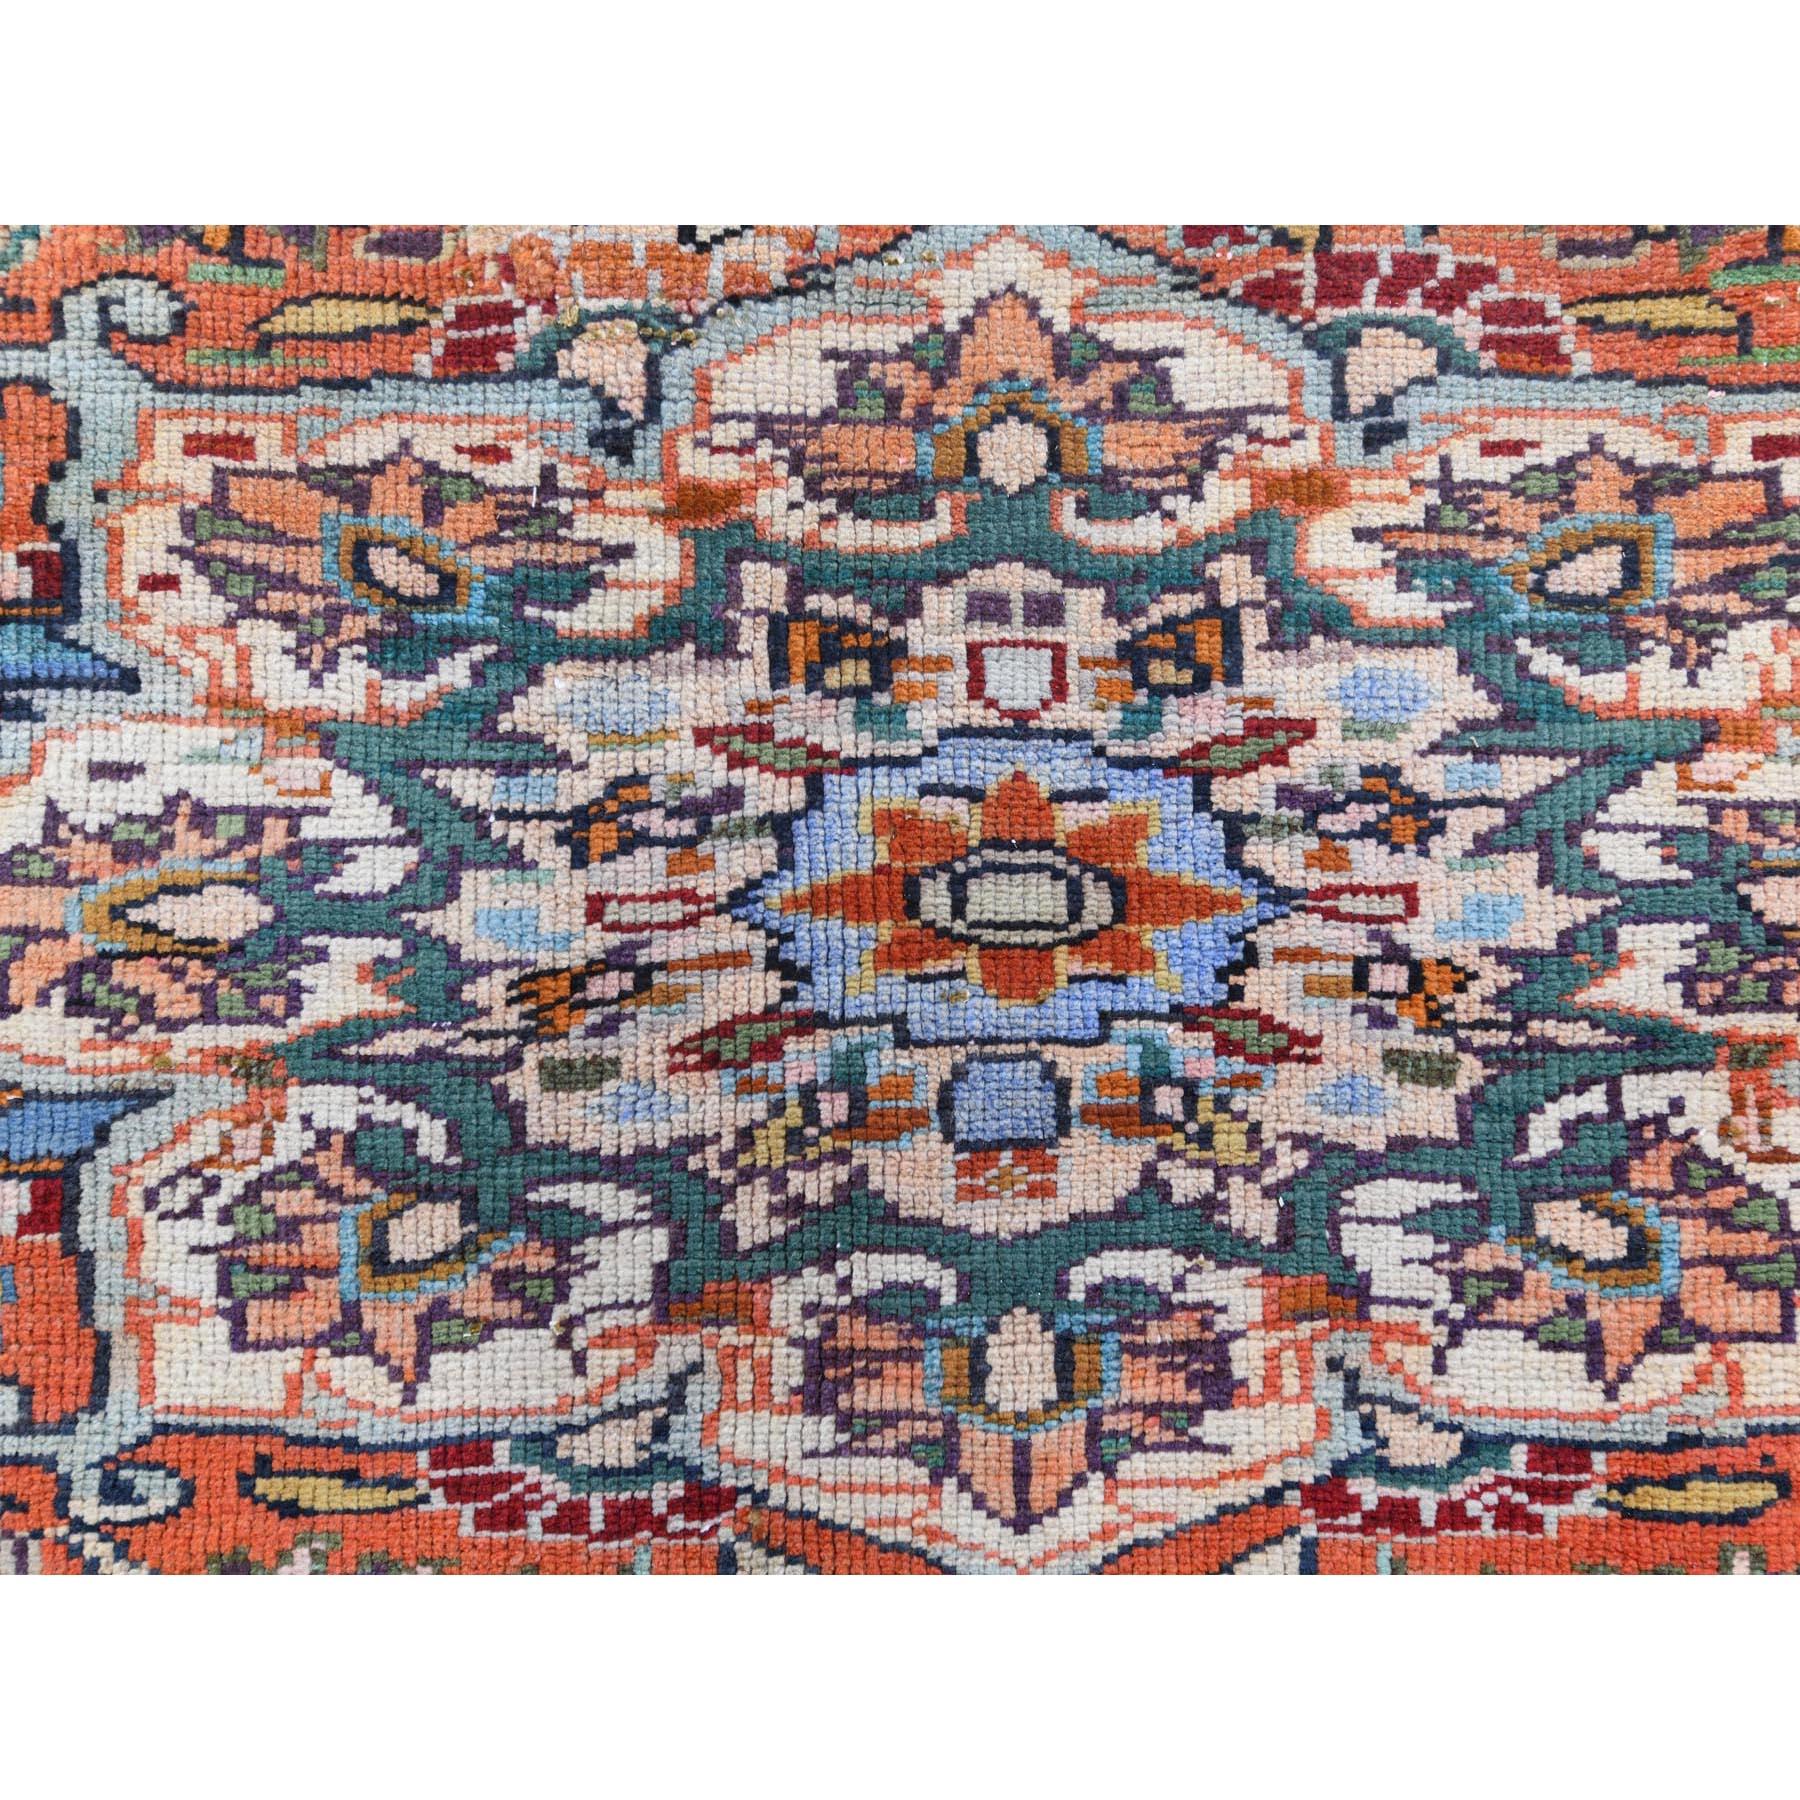 Sunset Color Shades Hand Knotted Vintage Persian Heriz, Distressed Worn Wool Rug 3